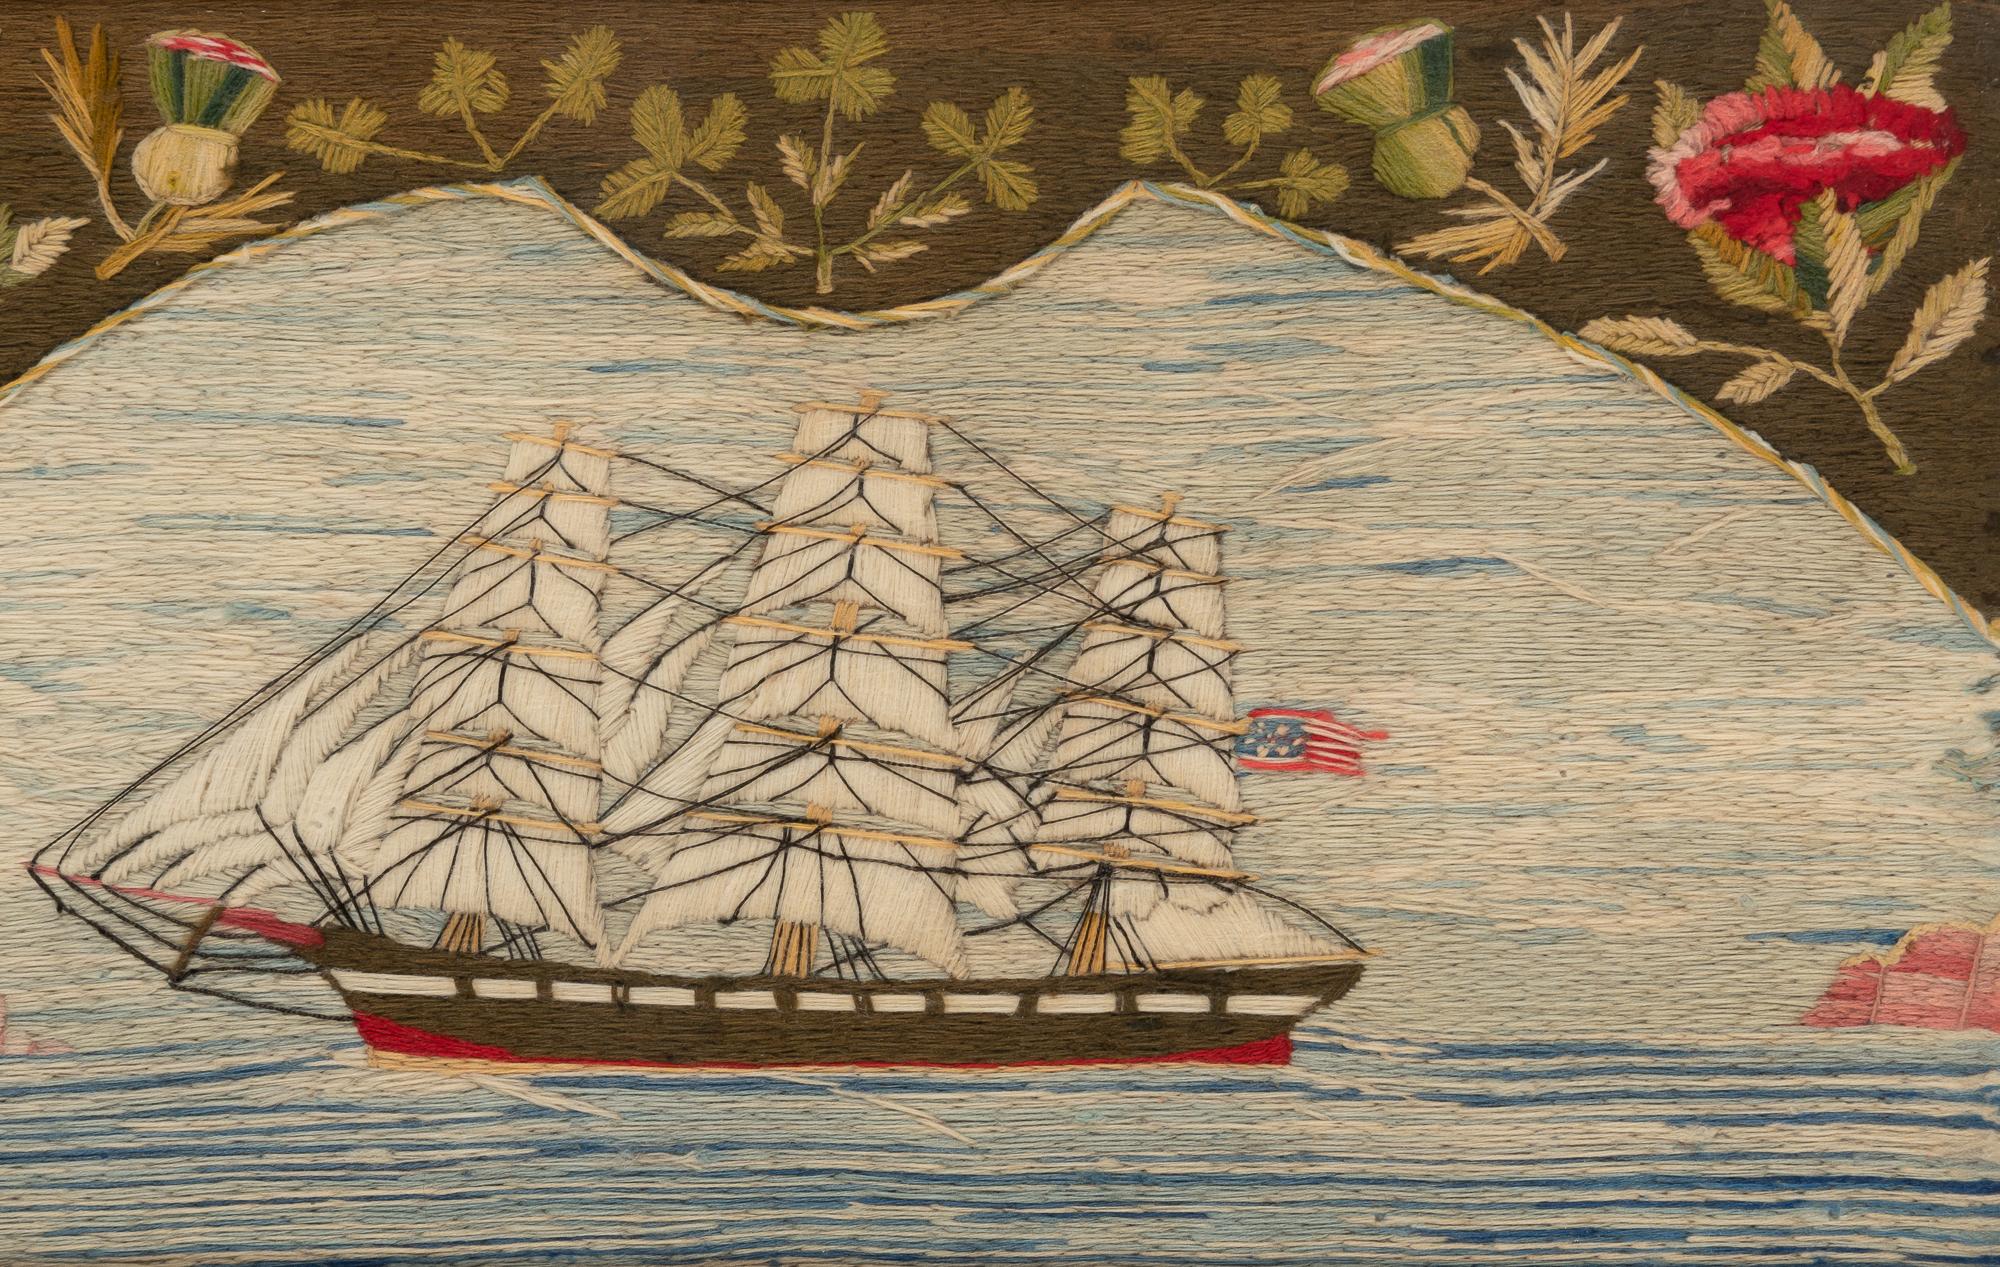 Sailor's Woolwork of an American Ship,
Circa 1875.

The unusual sailor's woolie or woolwork depicts an American three-masted ship under full sail within a fan-shaped panel with the section above embroidered like Berlin woolwork with patriotic